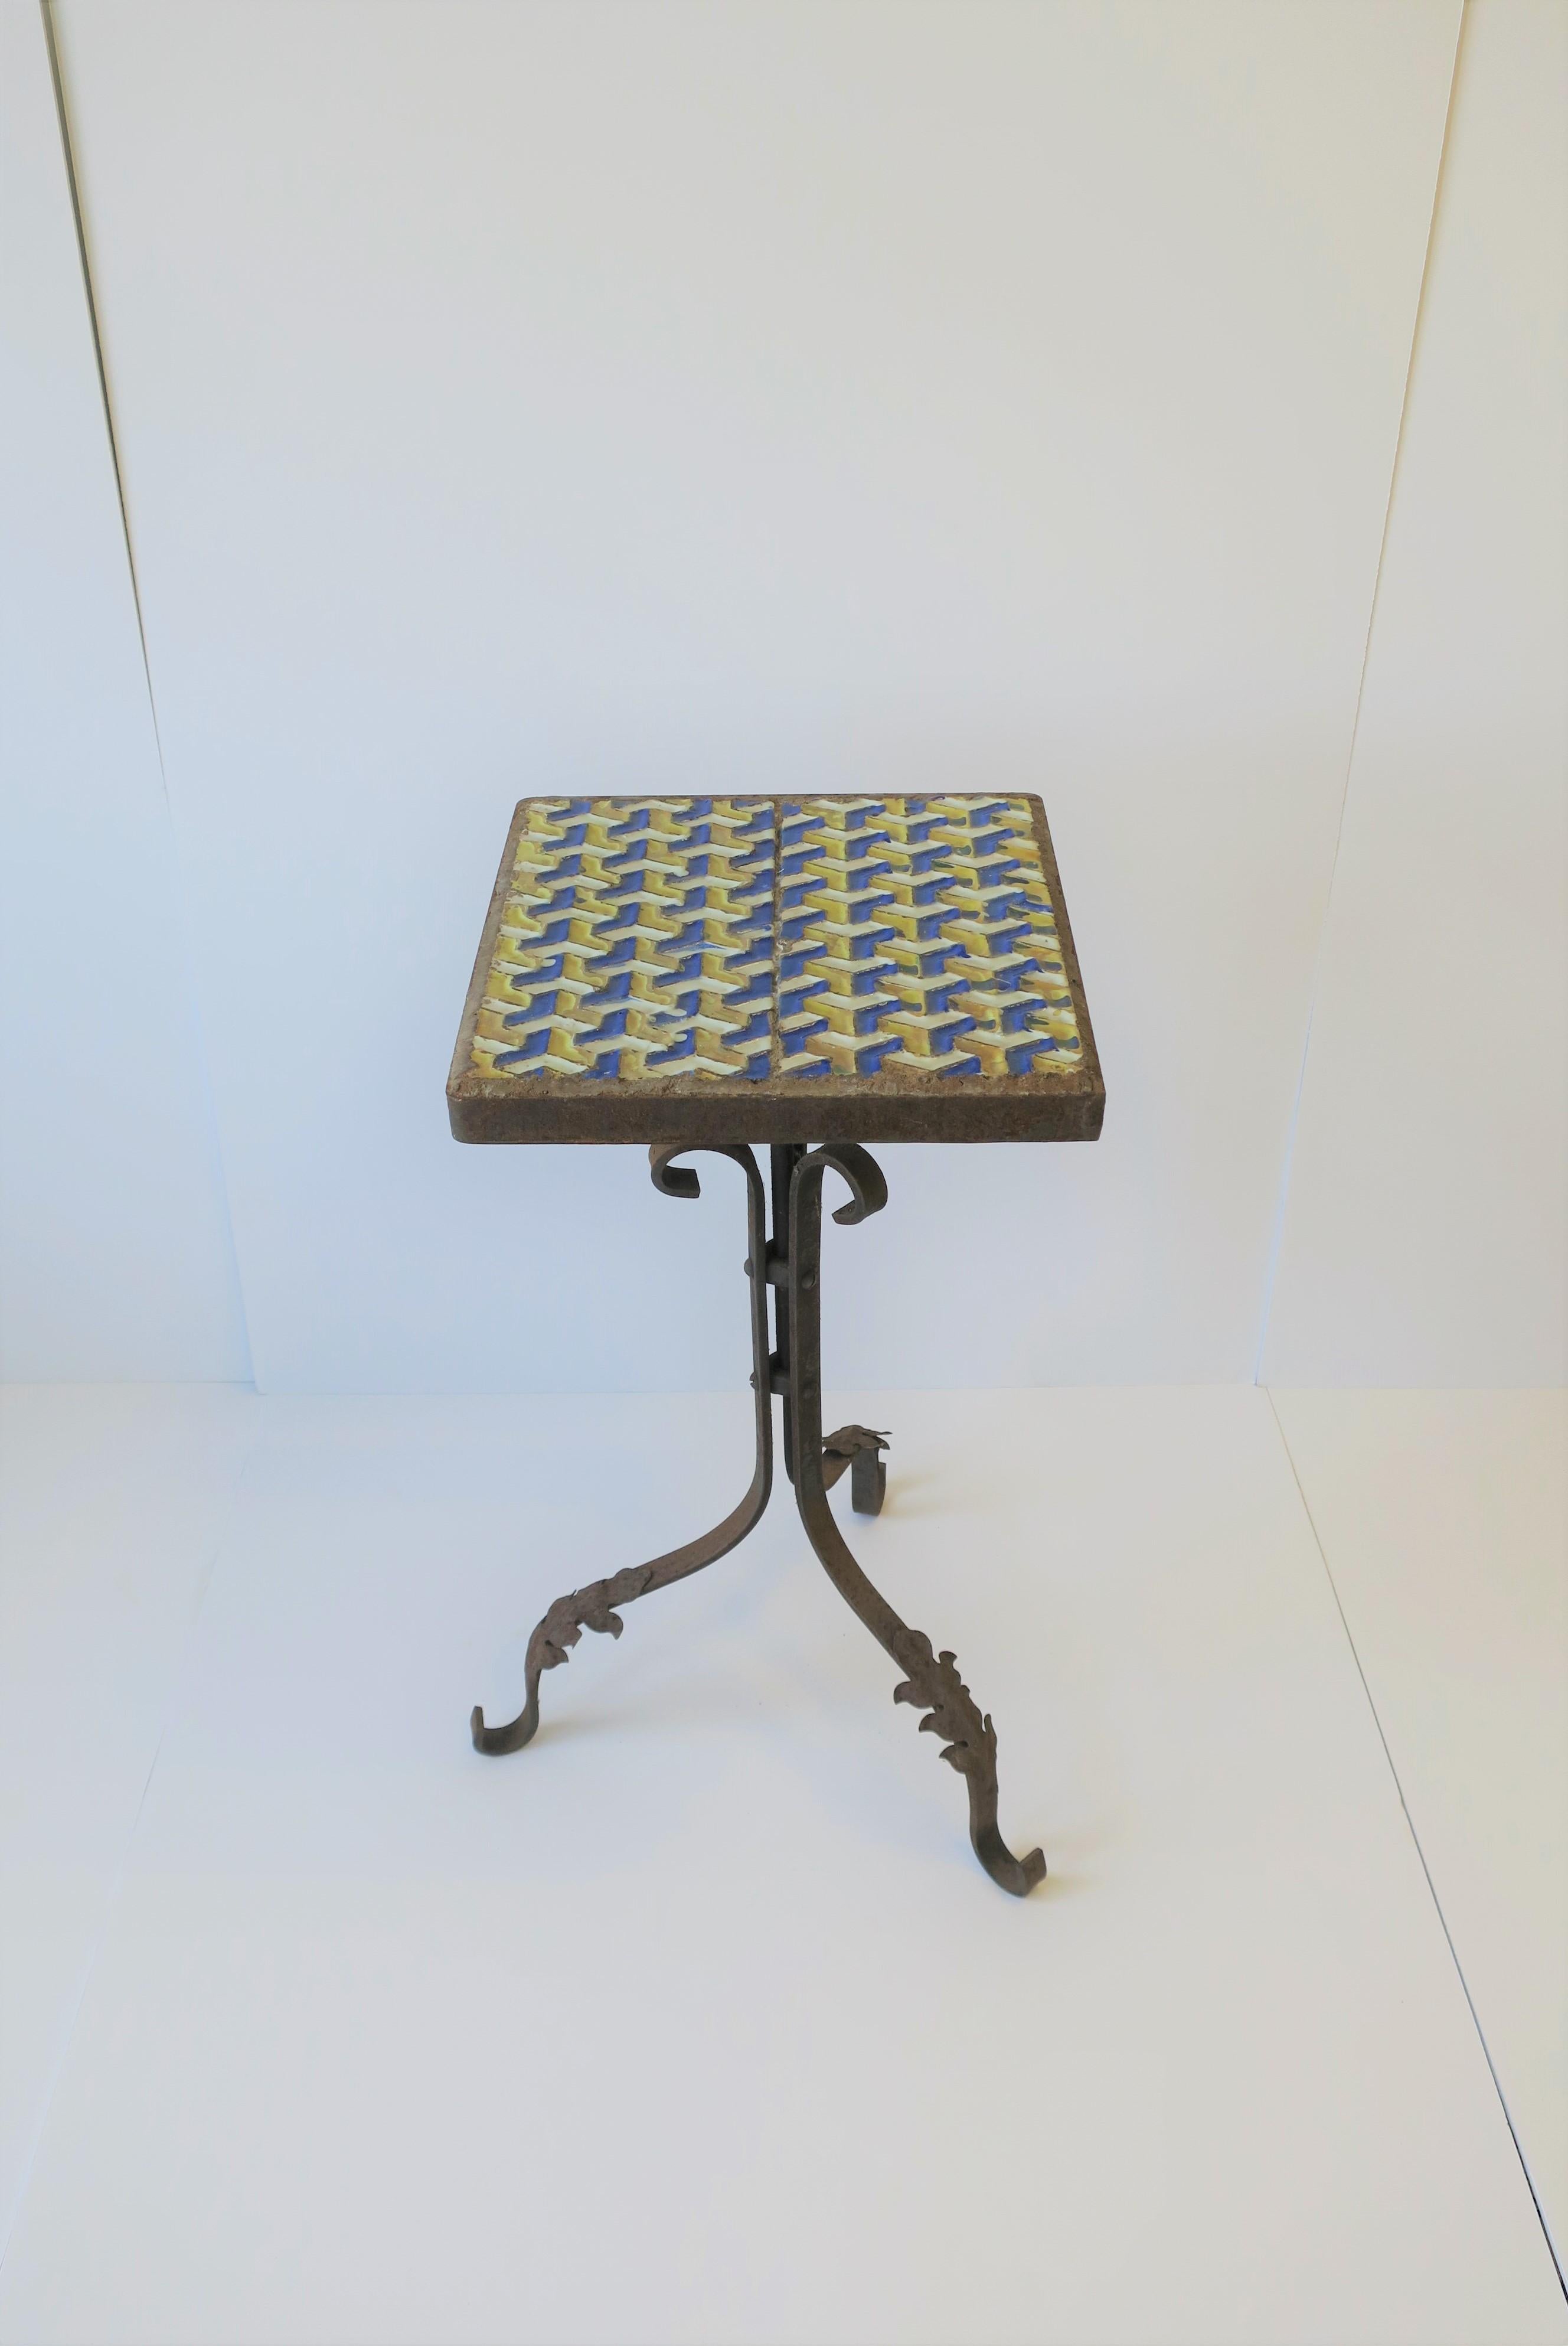 A substantial mid-20th century outdoor patio side table with a square ceramic or enamel top and tri-pod base legs. Table is 'weathered' iron and a modern geometric design top with colors that include: white, blue, and yellow. 

Table measures: 24